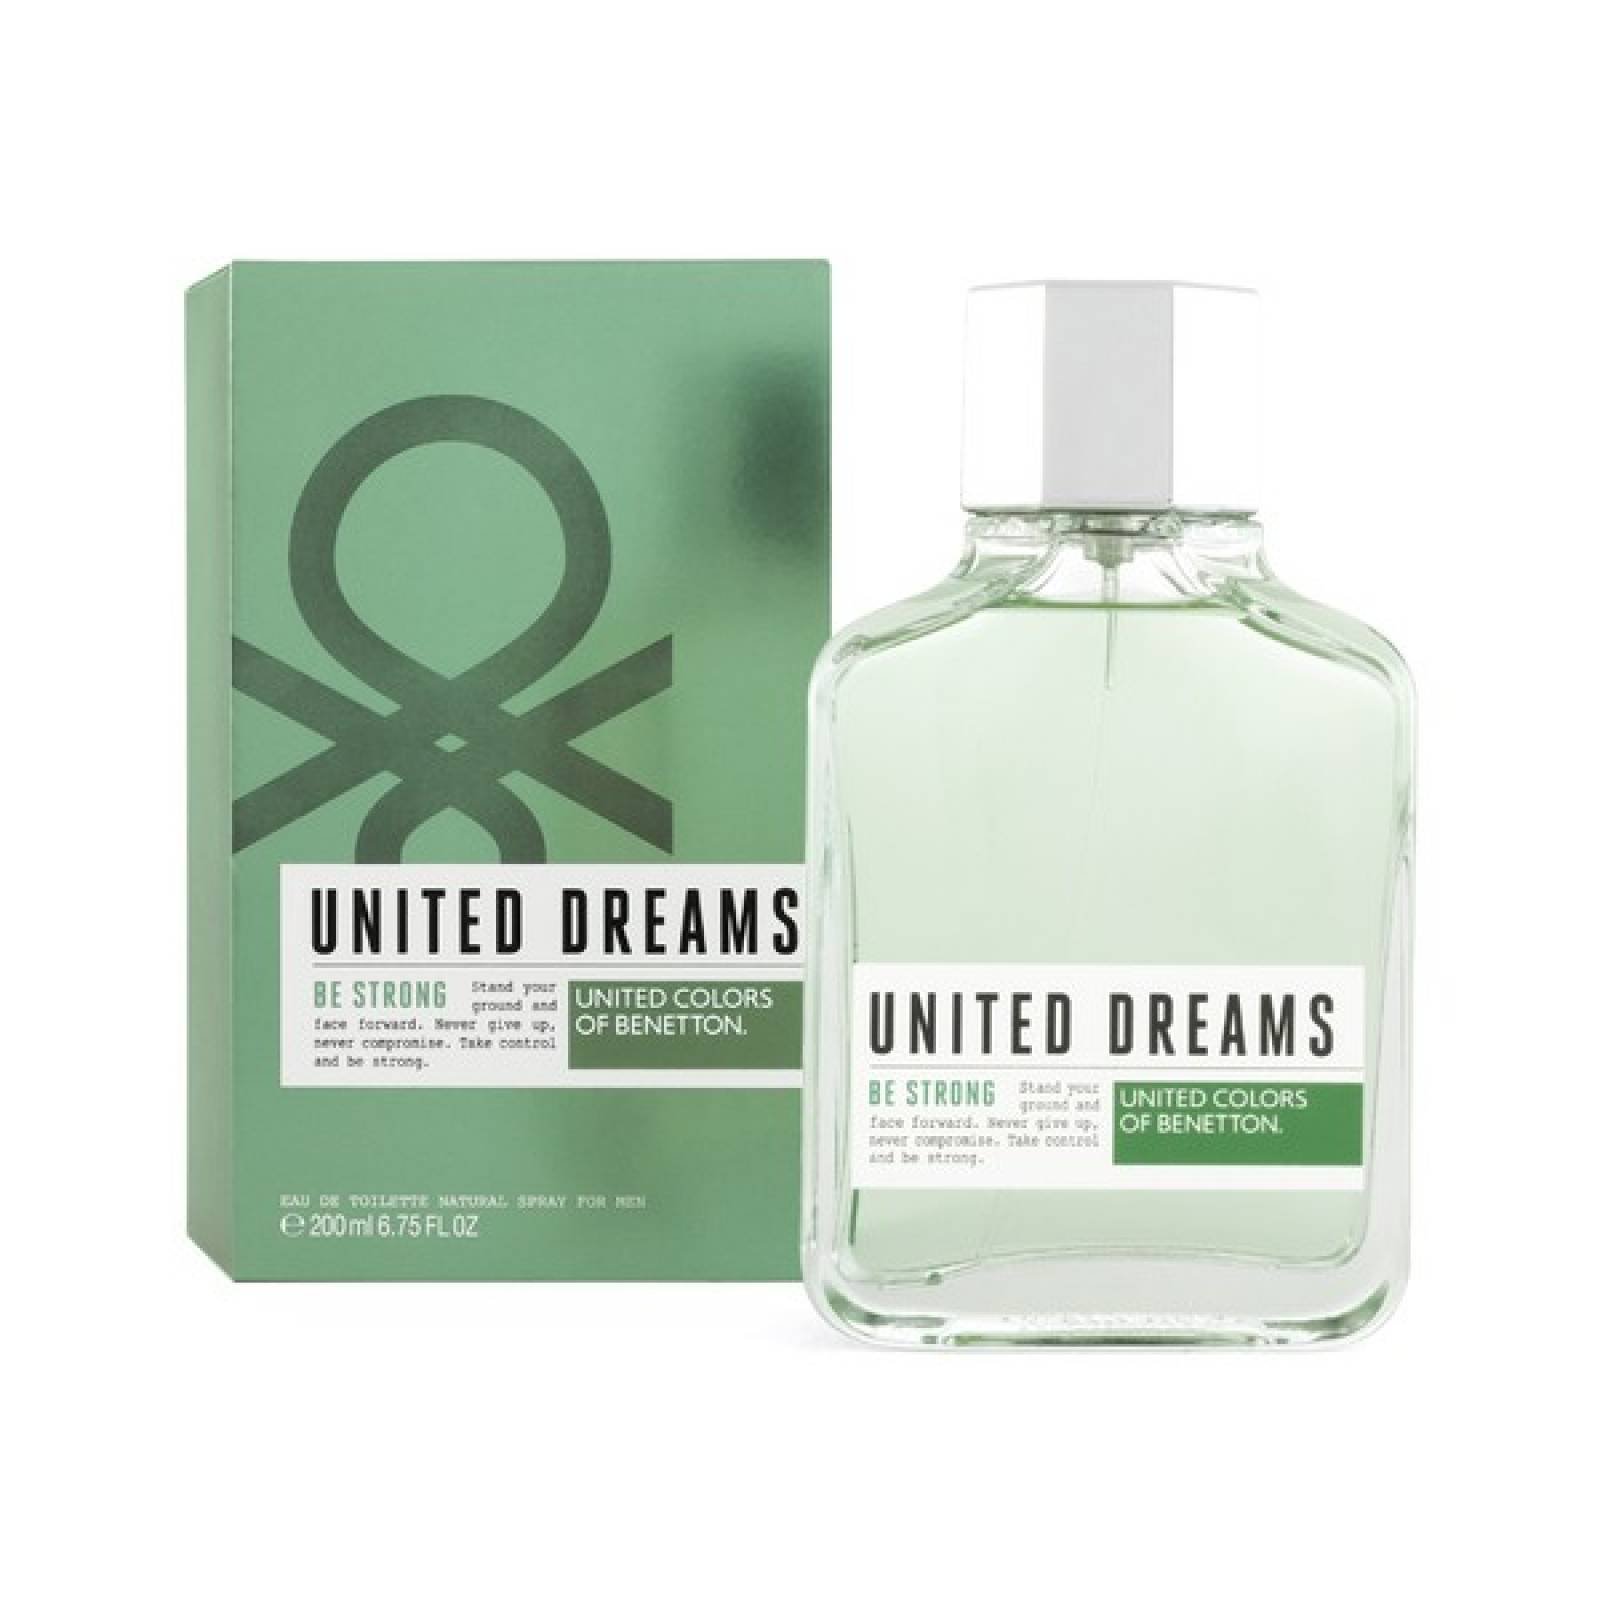 UNITED DREAMS BE STRONG 200ML EDT SPRAY CABALLERO